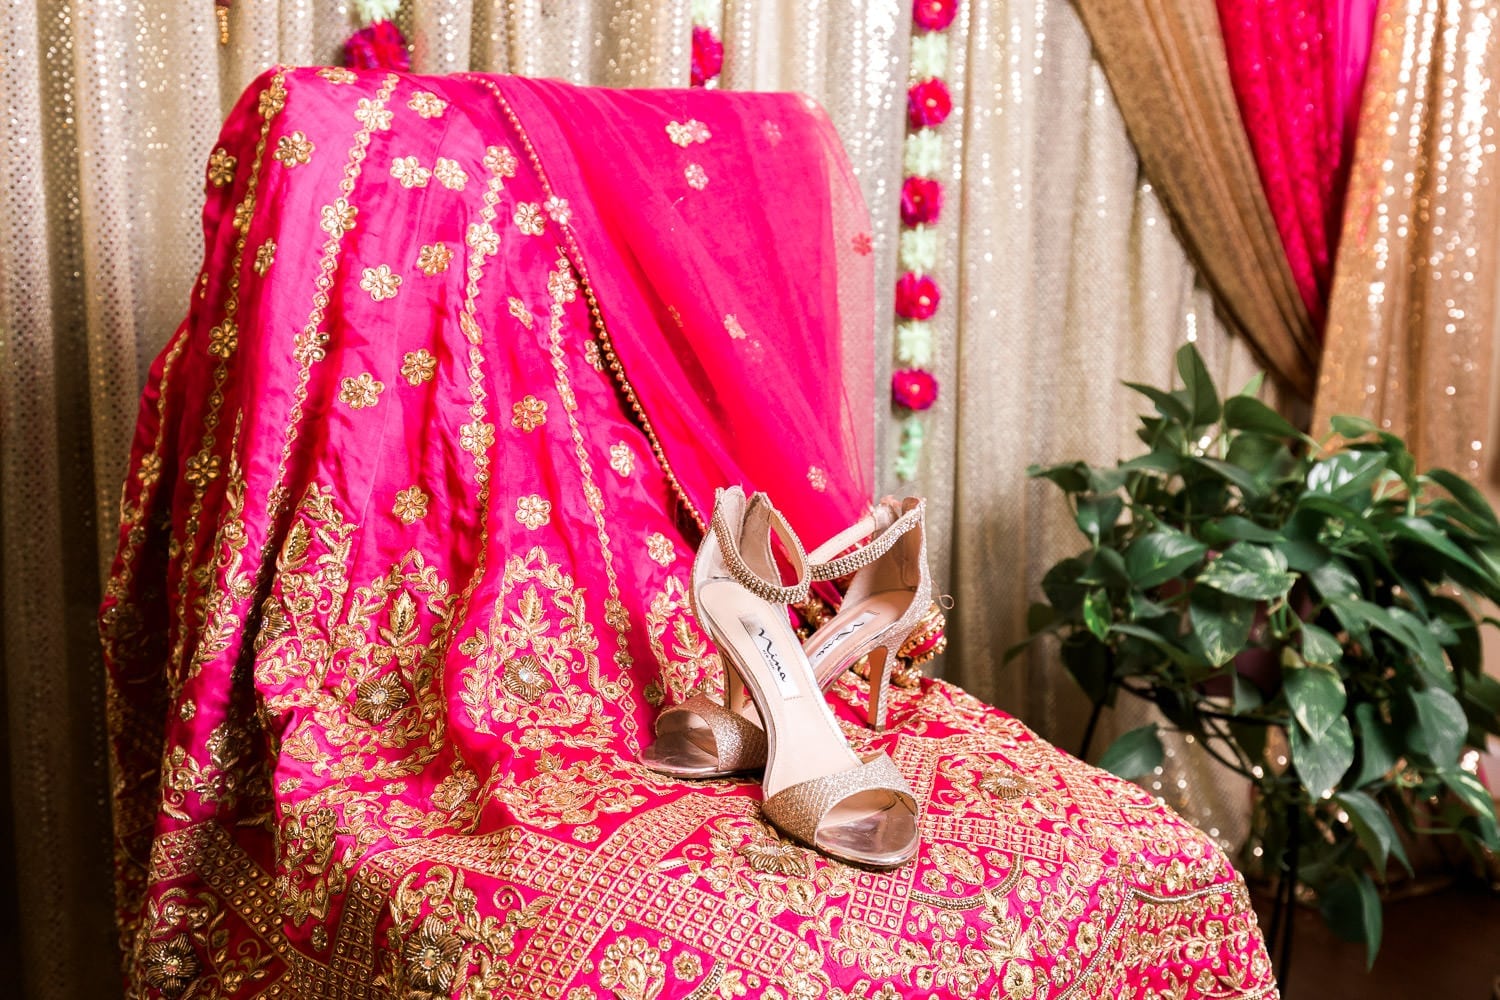 Indian bride wedding dress and shoes | Indian wedding photography Vancouver